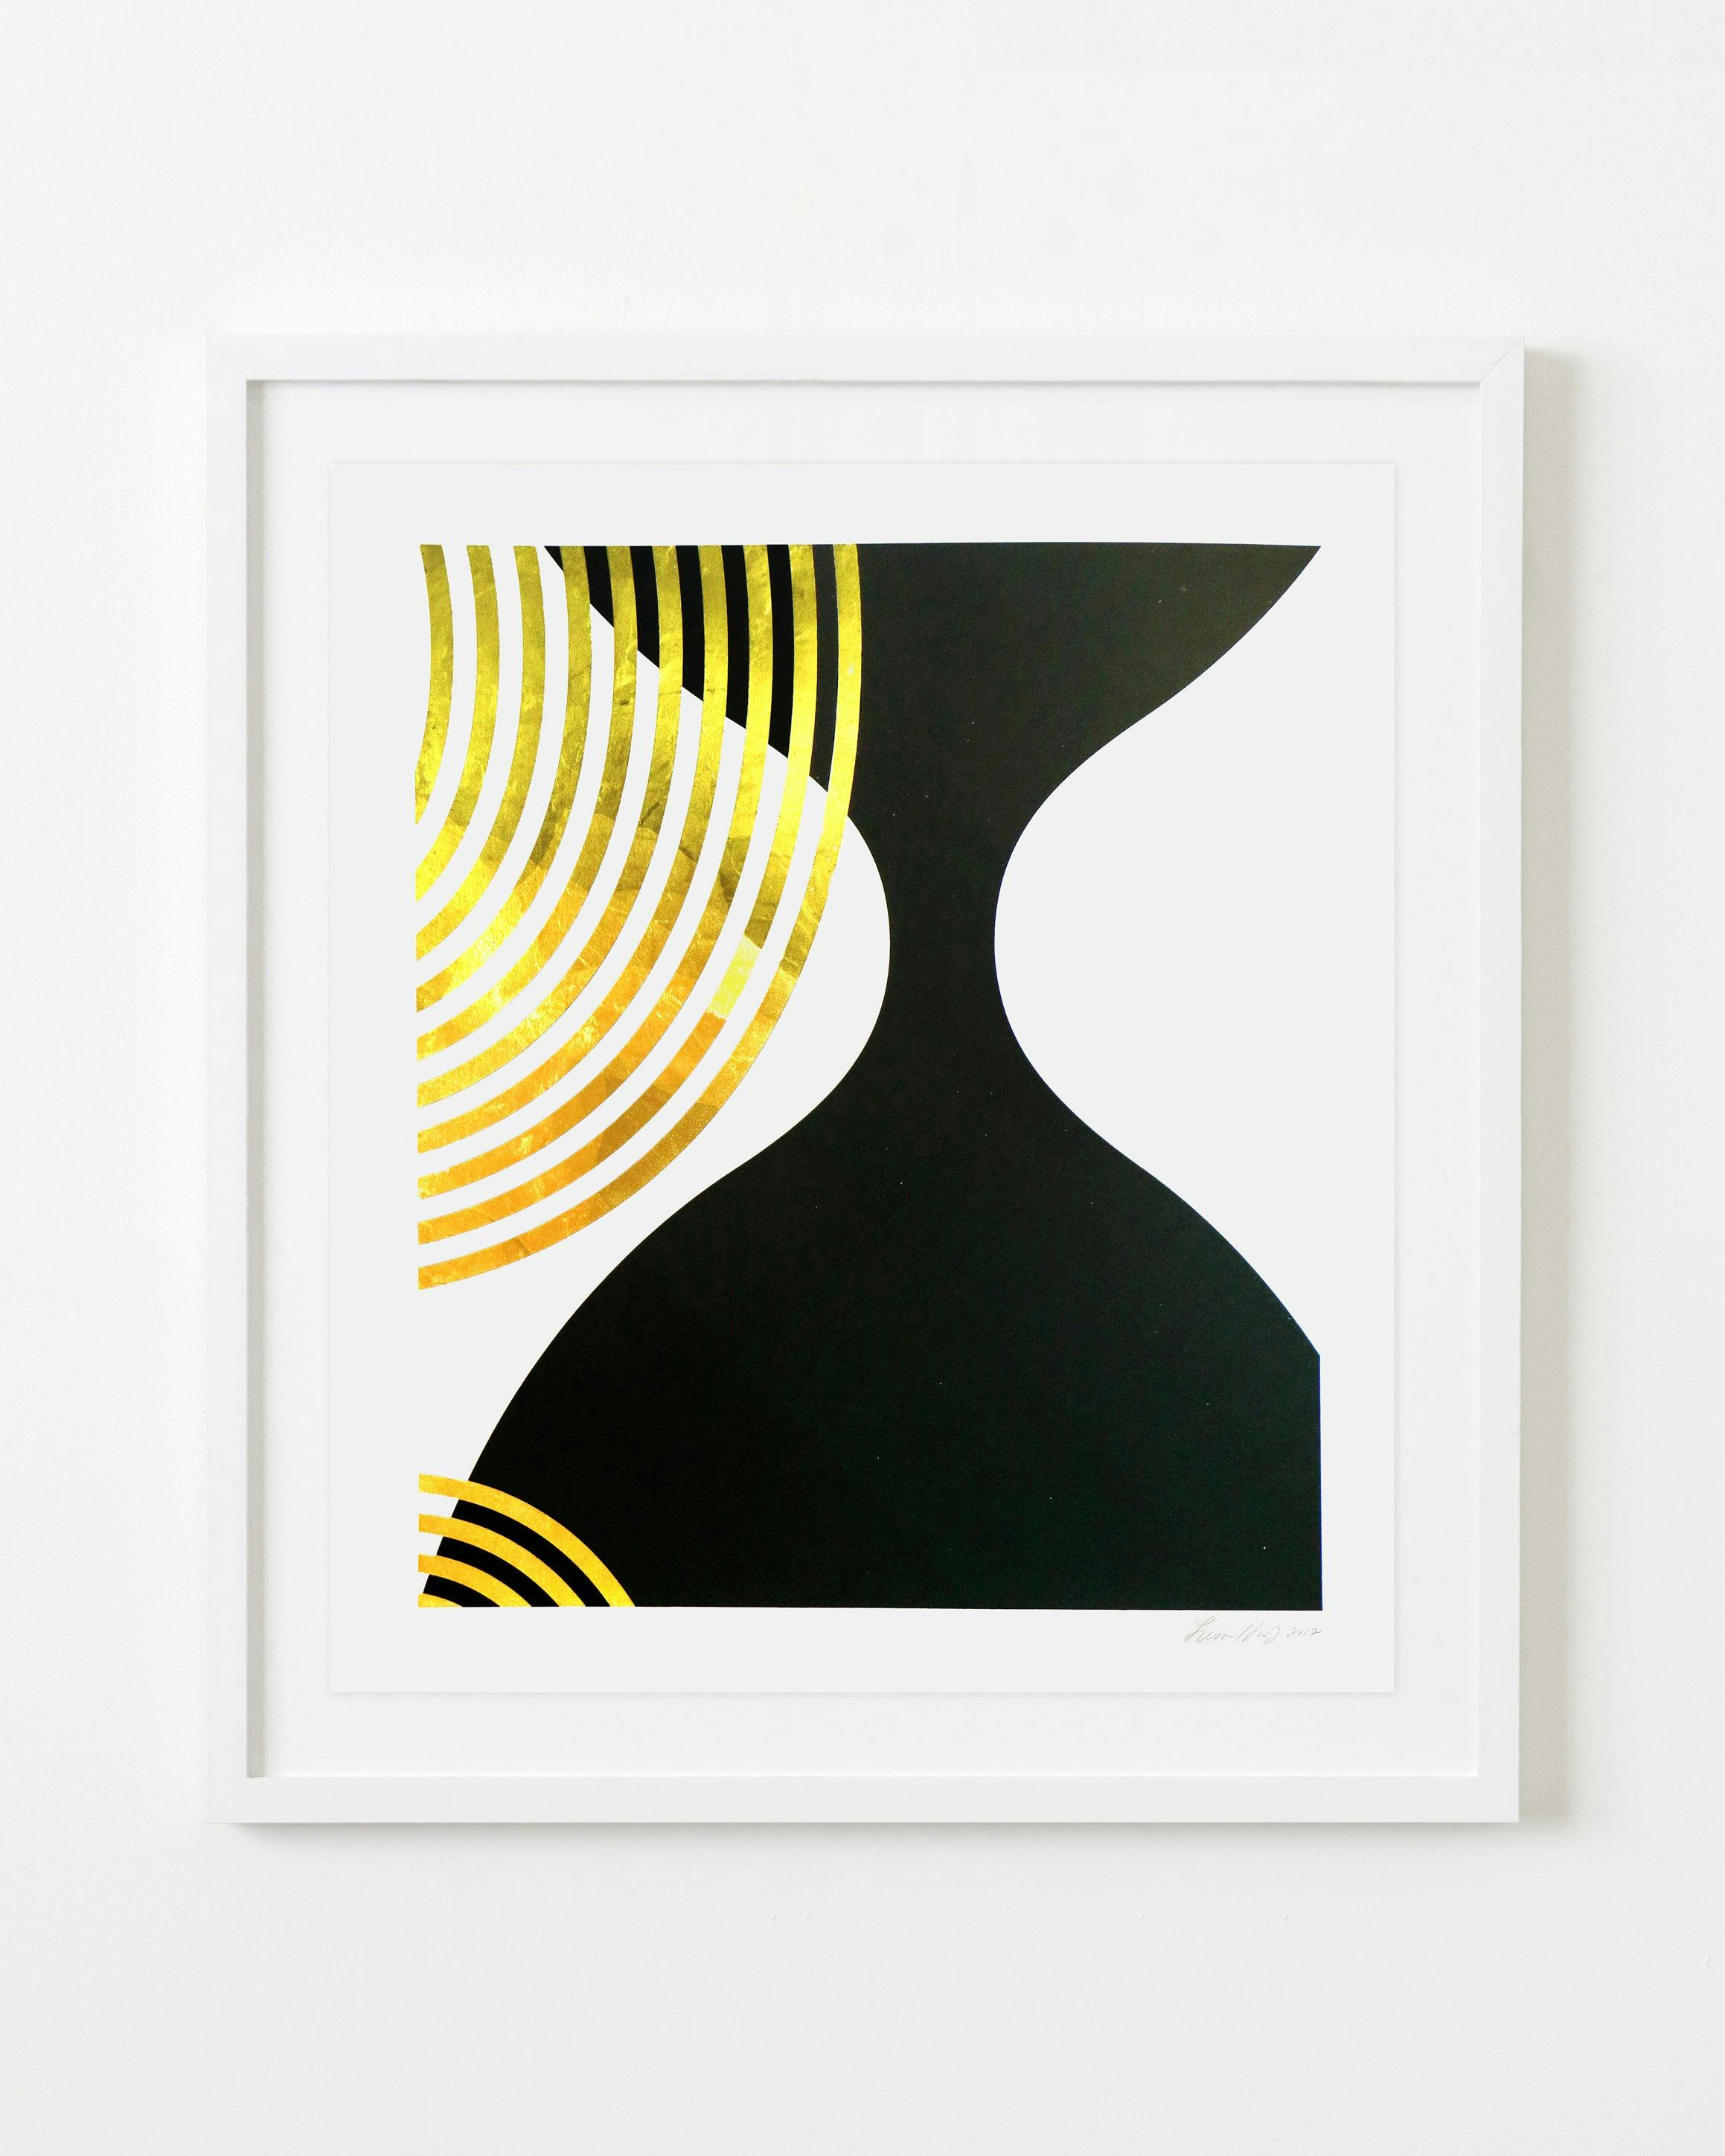 Print by Lisa Hunt titled "Cross Sections: Untitled 3".